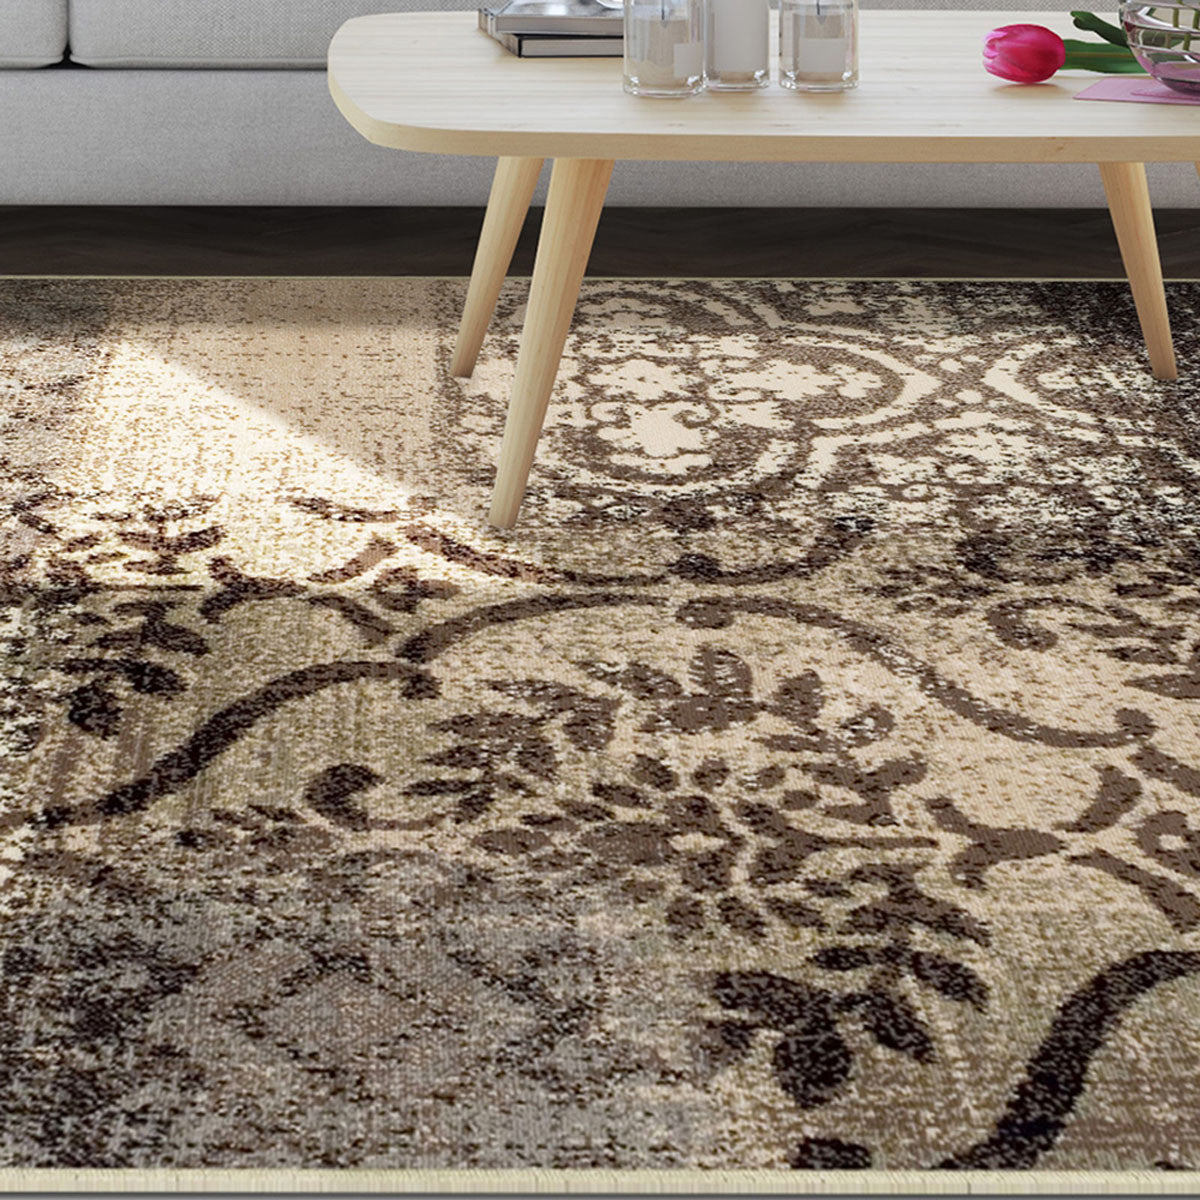 4' X 6' Tan And Brown Damask Distressed Stain Resistant Area Rug